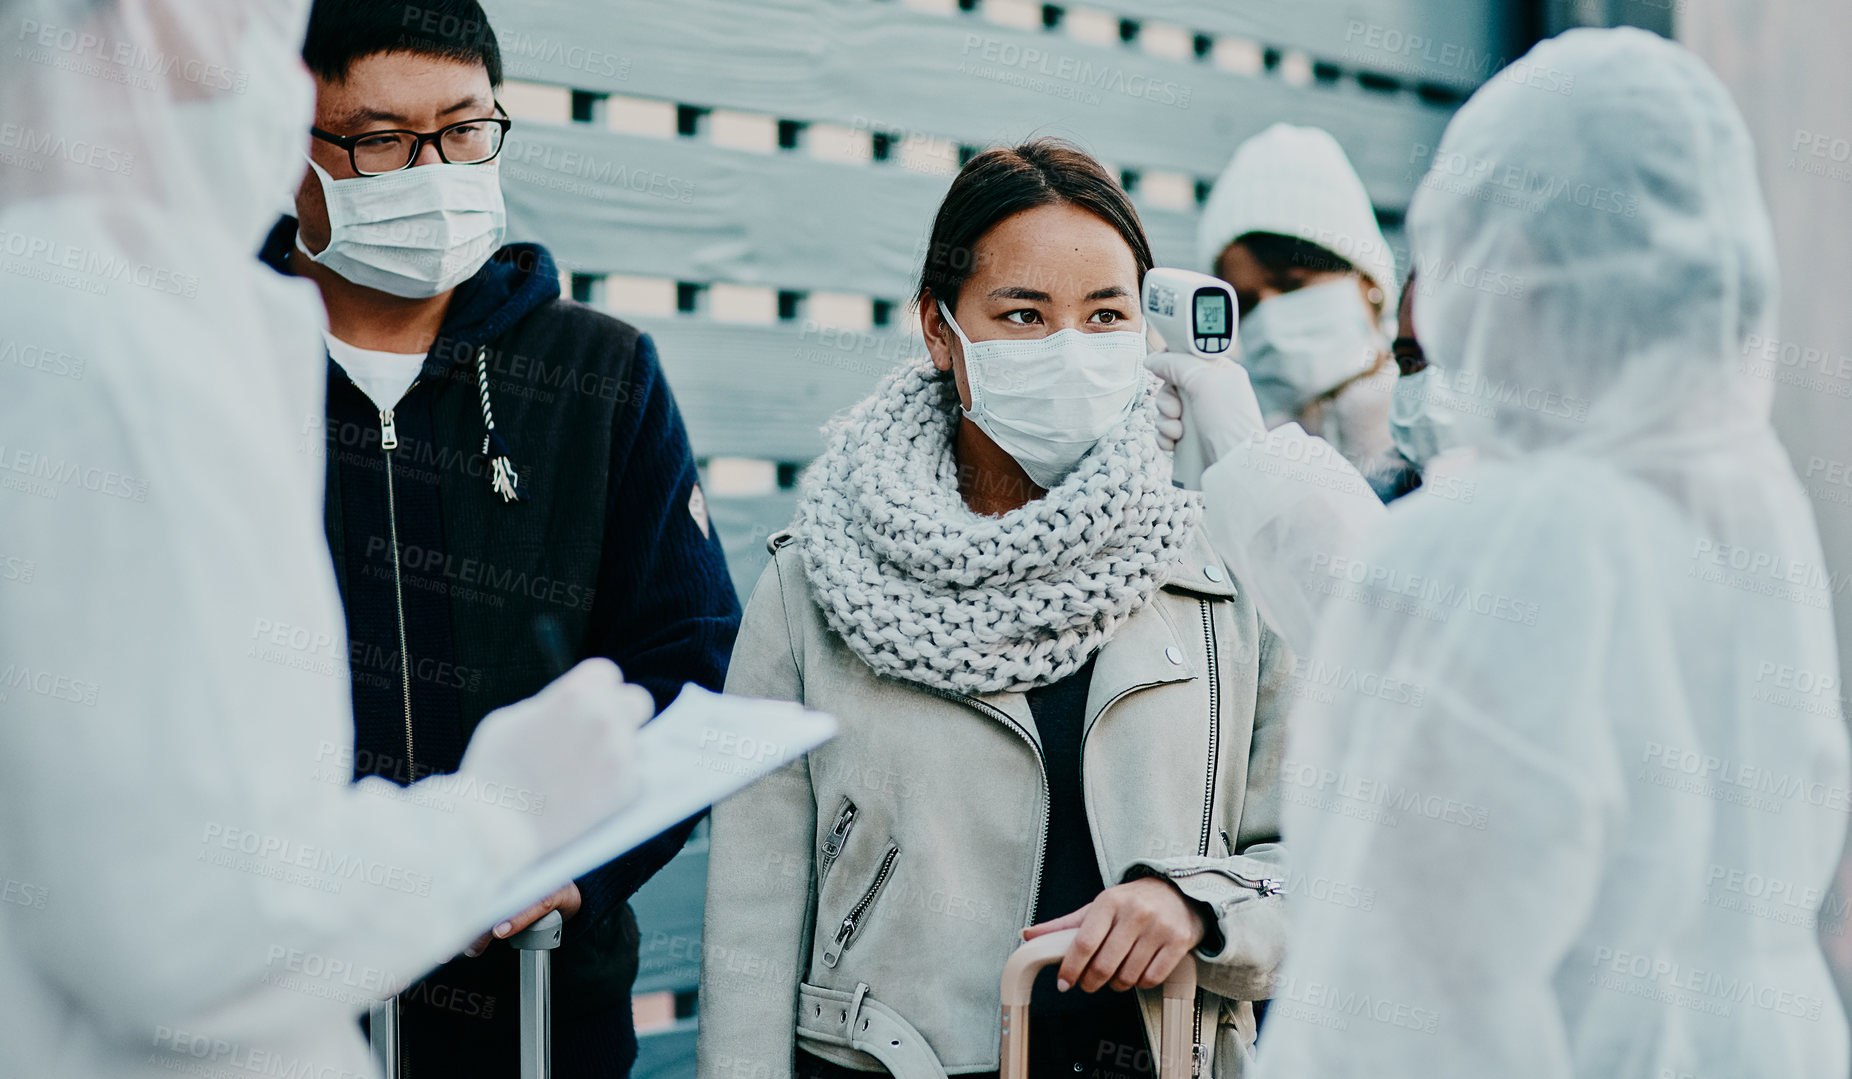 Buy stock photo Traveling woman getting a covid temperature scan at the border with medical security doing screening test for safety during pandemic. Foreign people or traveler arriving at an airport with face mask